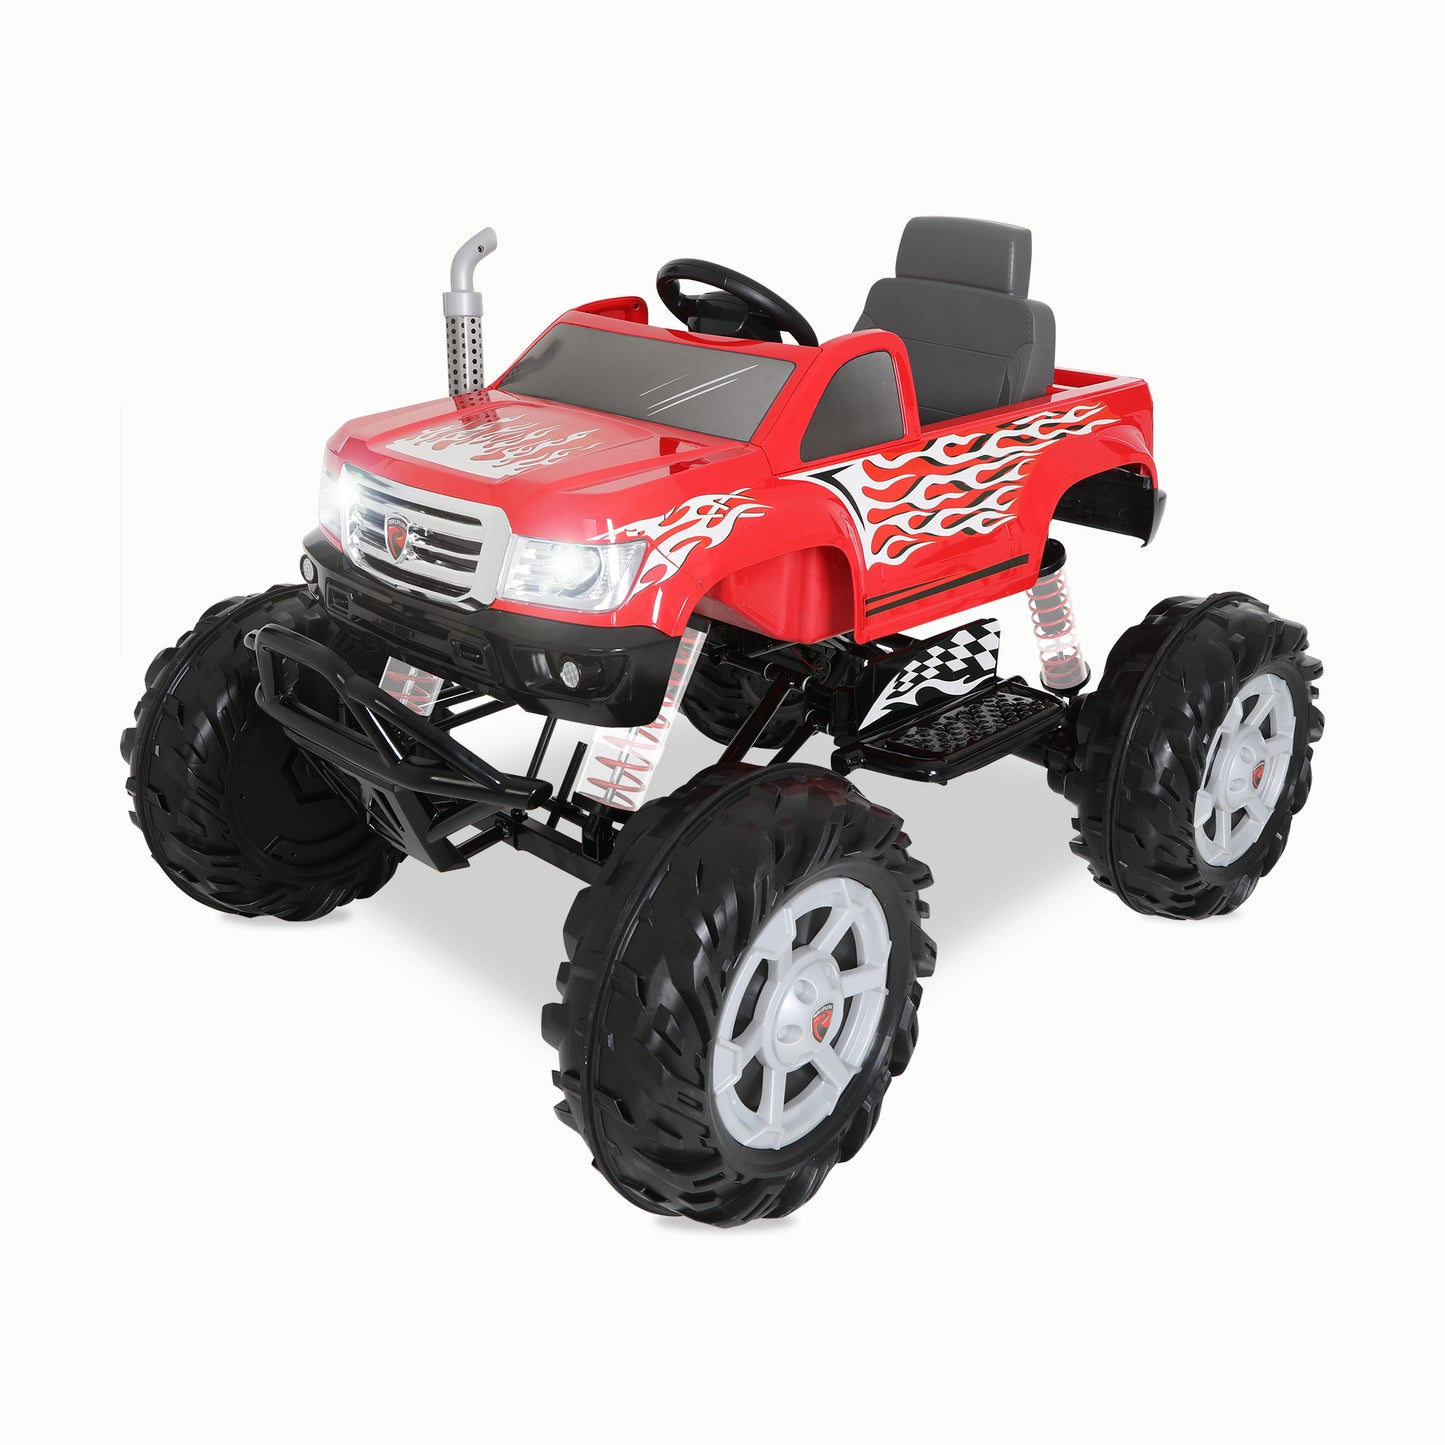 Monster Truck 24-Volt Battery Ride-On Vehicle (Red)